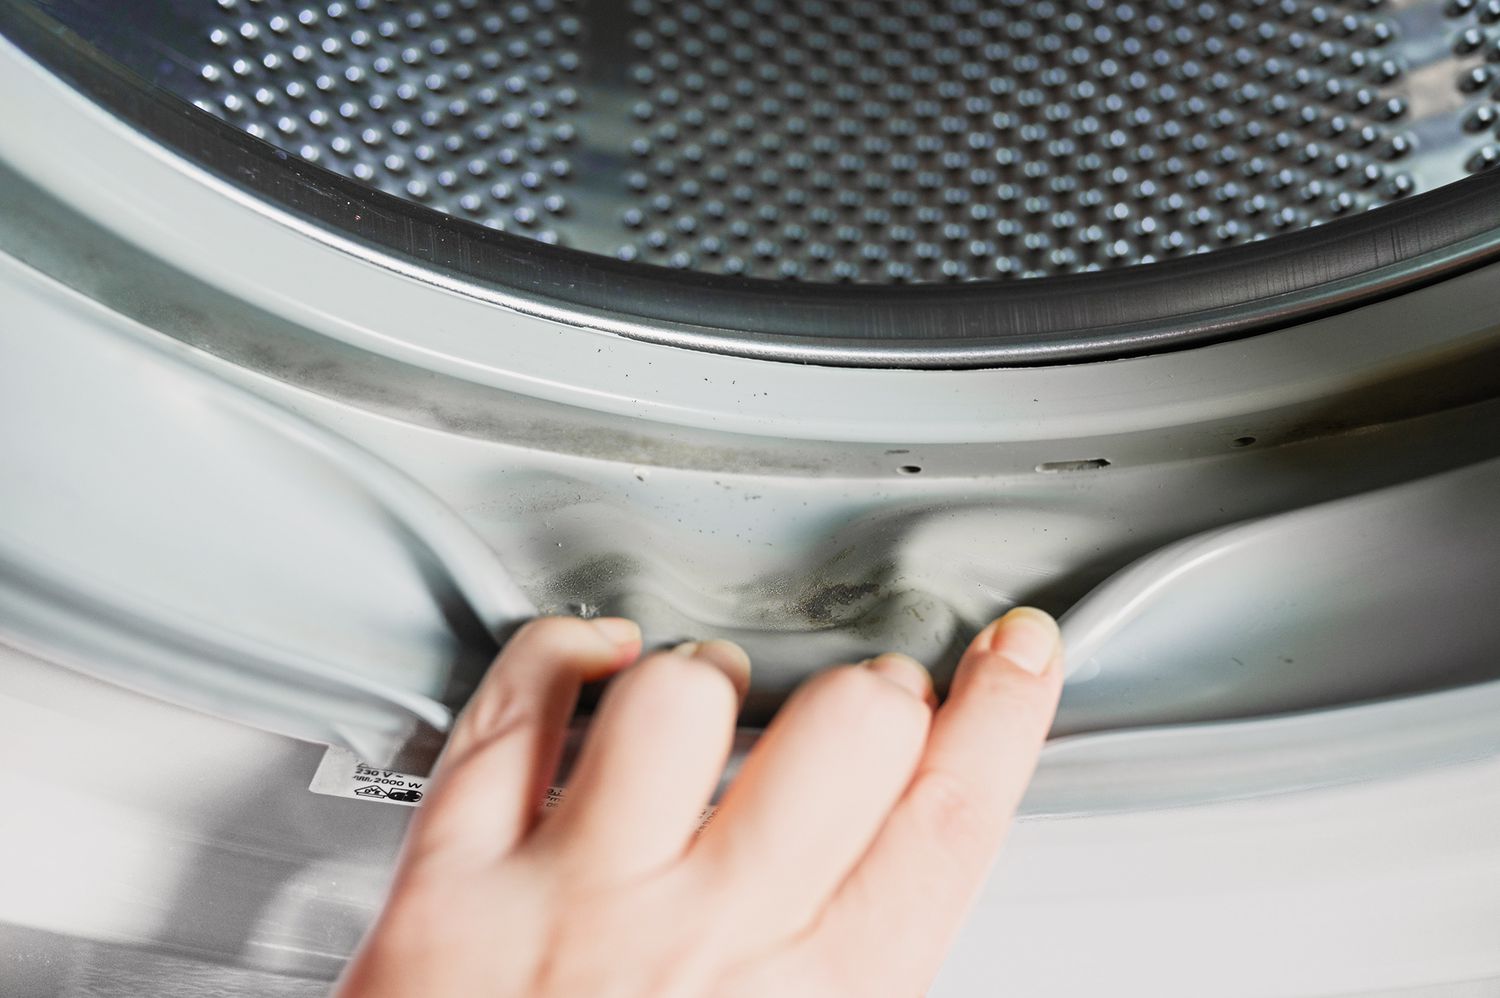 How To Clean Mold From Front Load Washer